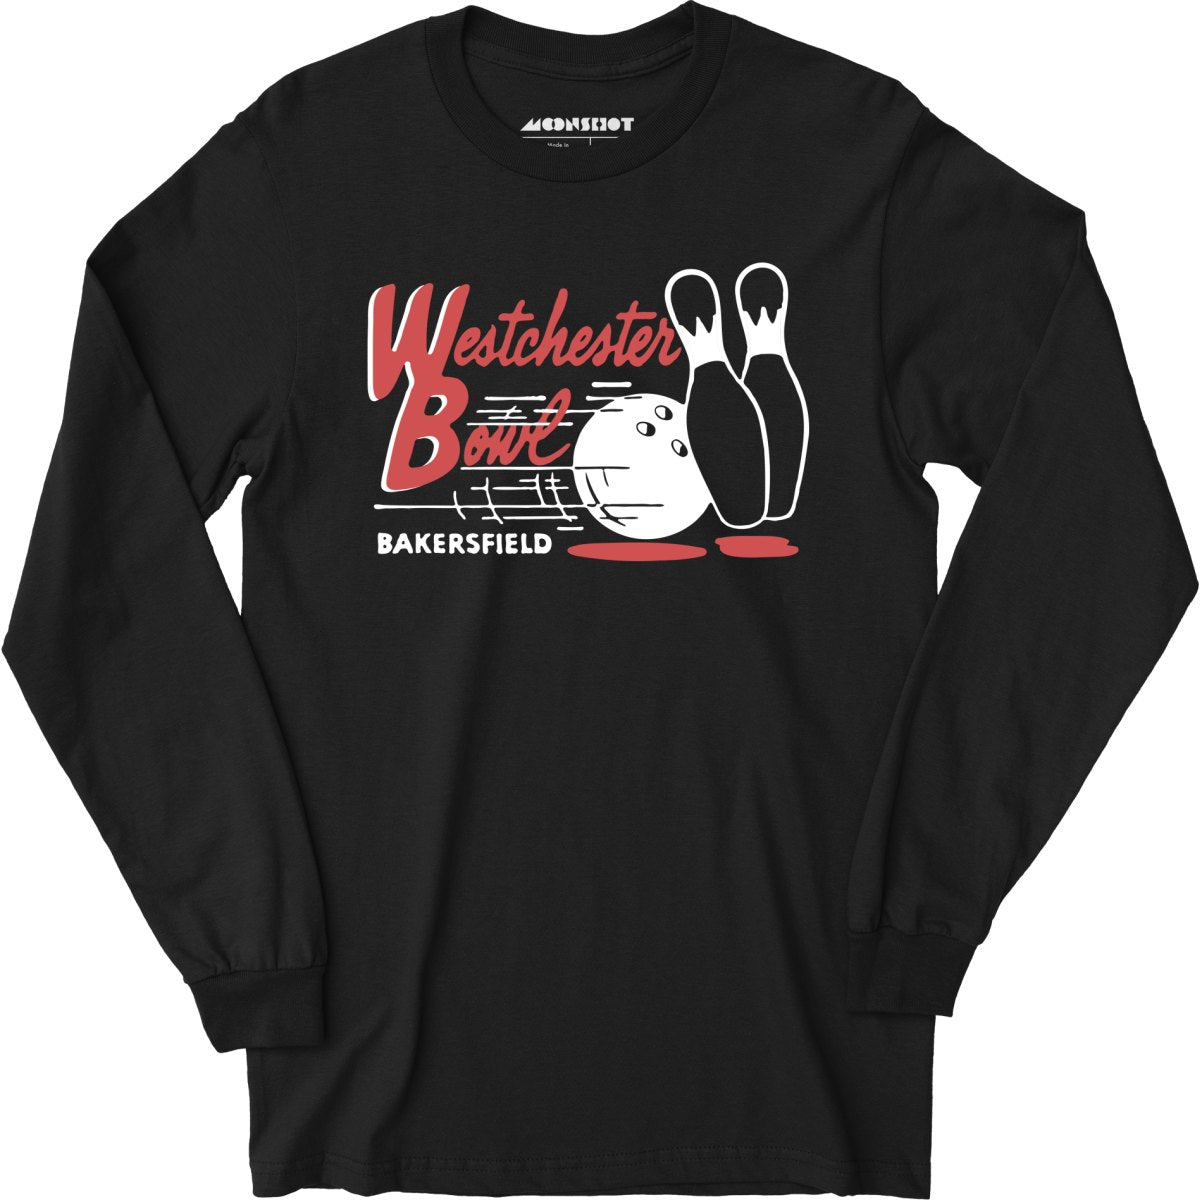 Westchester Bowl - Bakersfield, CA - Vintage Bowling Alley - Long Sleeve T-Shirt